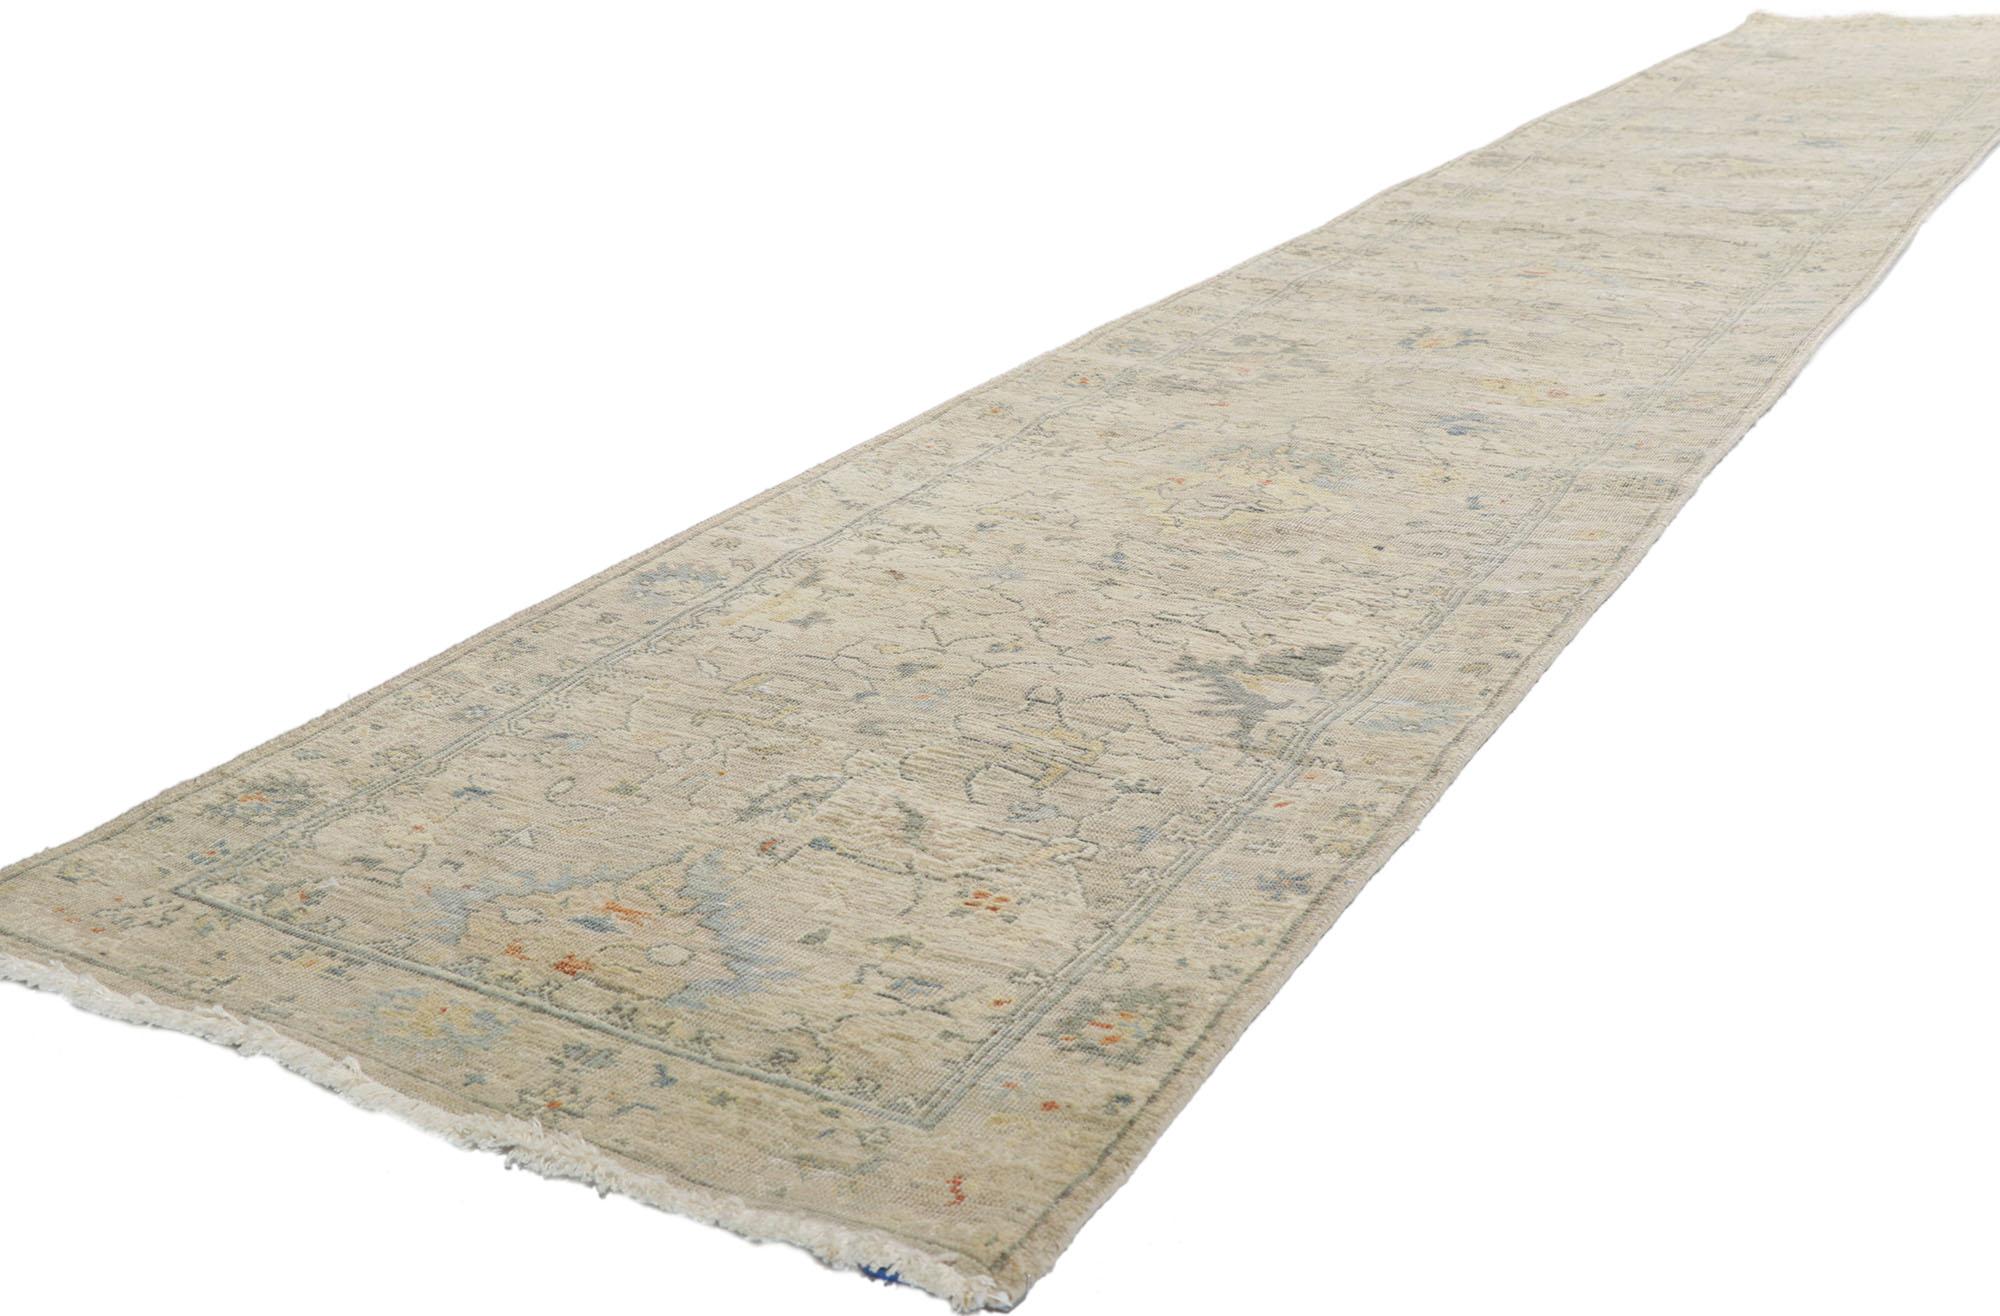 30714 Vintage-Inspired Modern Oushak Rug, 02'05 x 15'08.
Emanating traditional sensibility and rugged beauty with a neutral color palette, this hand-knotted wool distressed Indian Oushak runner creates an inimitable warmth and calming ambiance. The